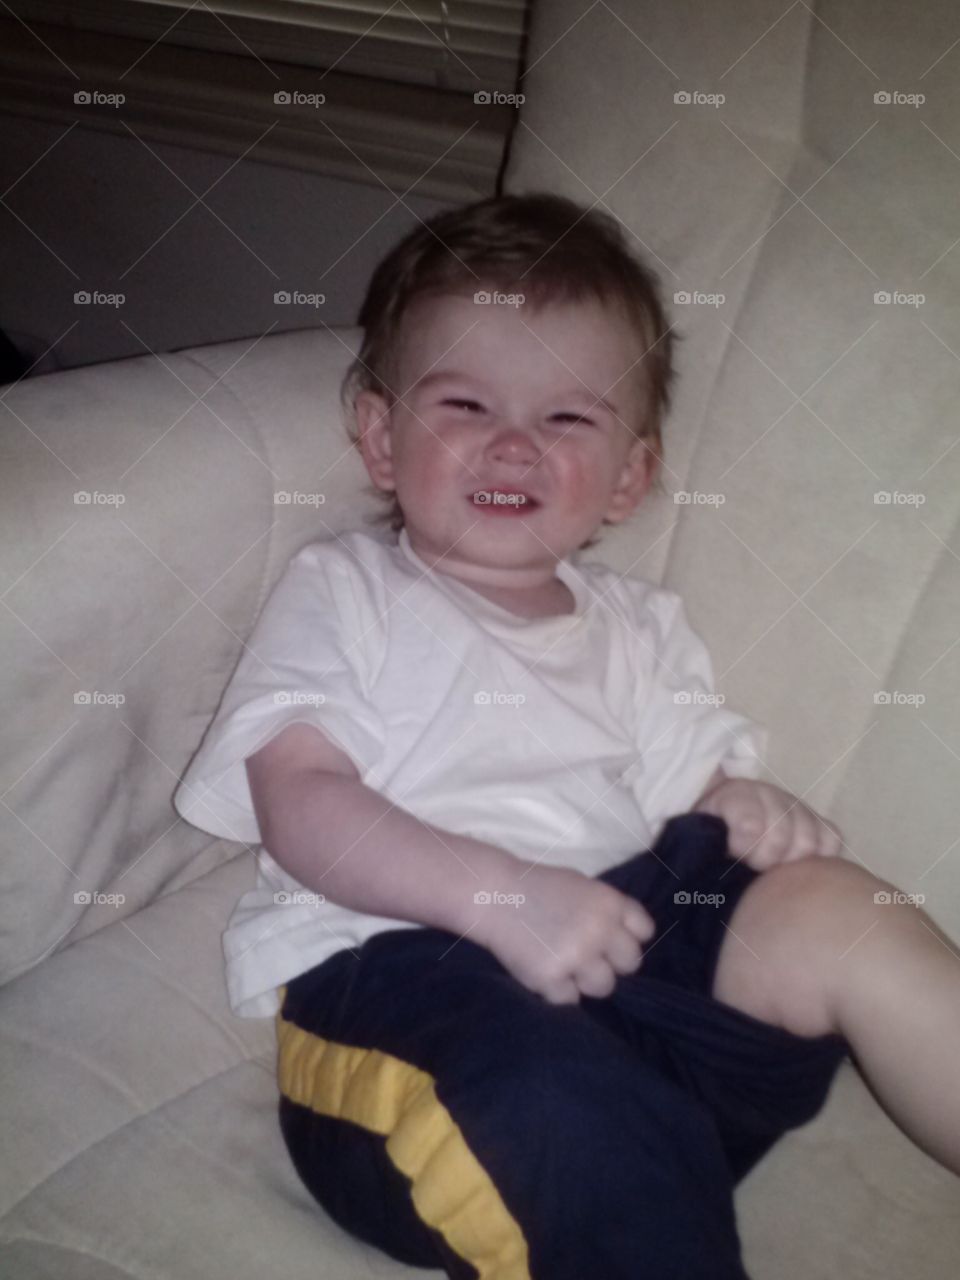 Big smiley face . This happened when I told him to smile :) cheeesssee